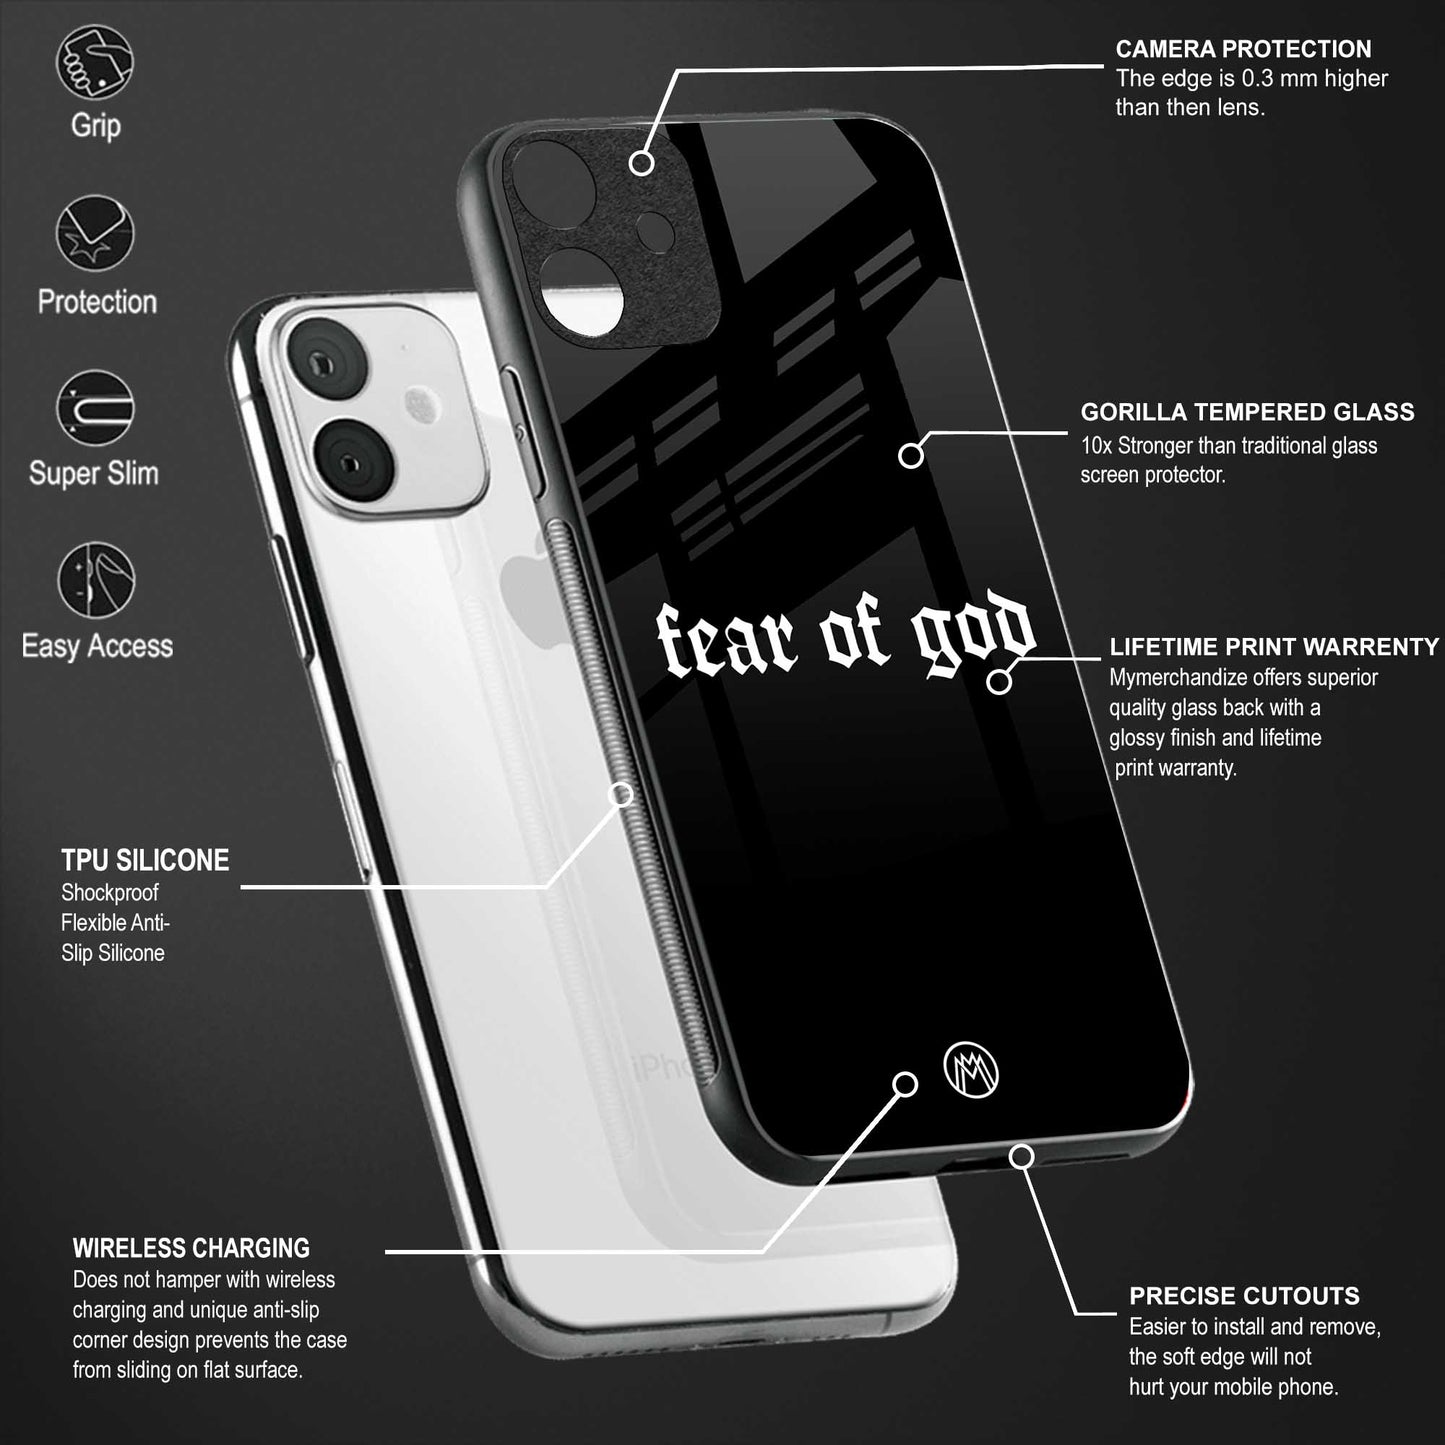 fear of god phone cover for redmi 8a